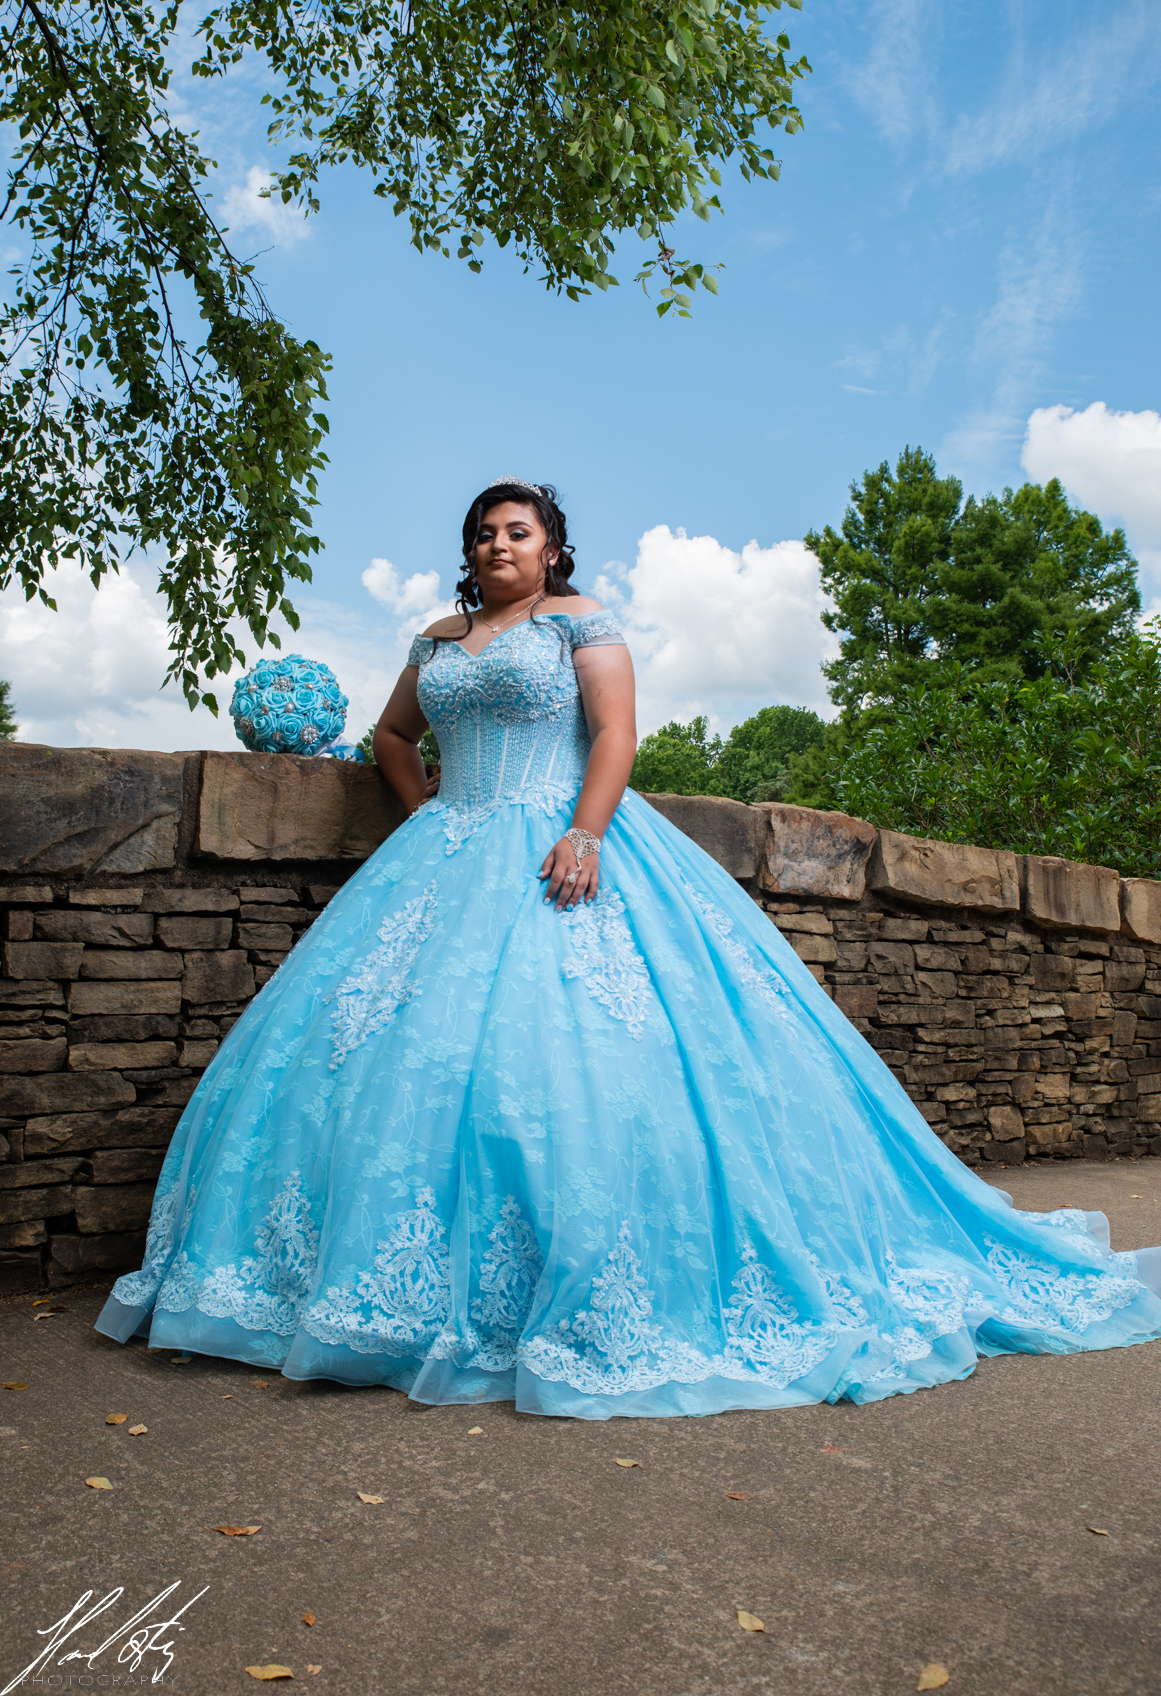 Freedom Park charlotte NC quinceañeras Photoshoot |sweet16 hortiz photography and video